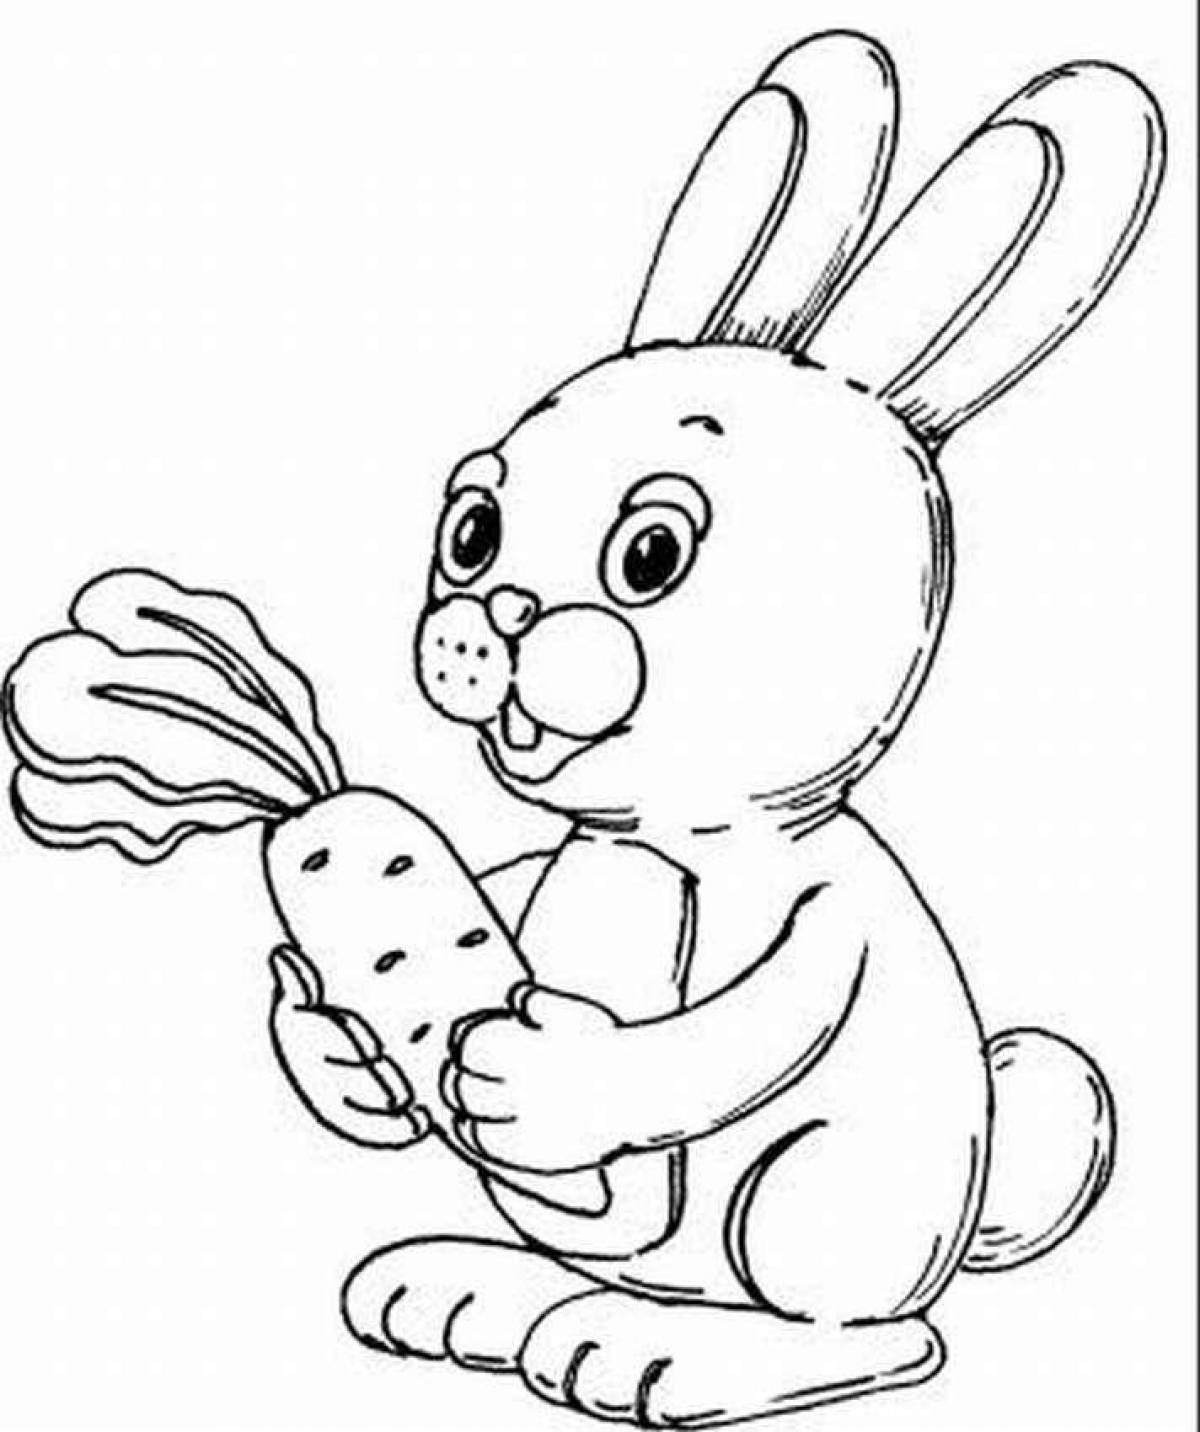 Coloring page adorable rabbit with a carrot